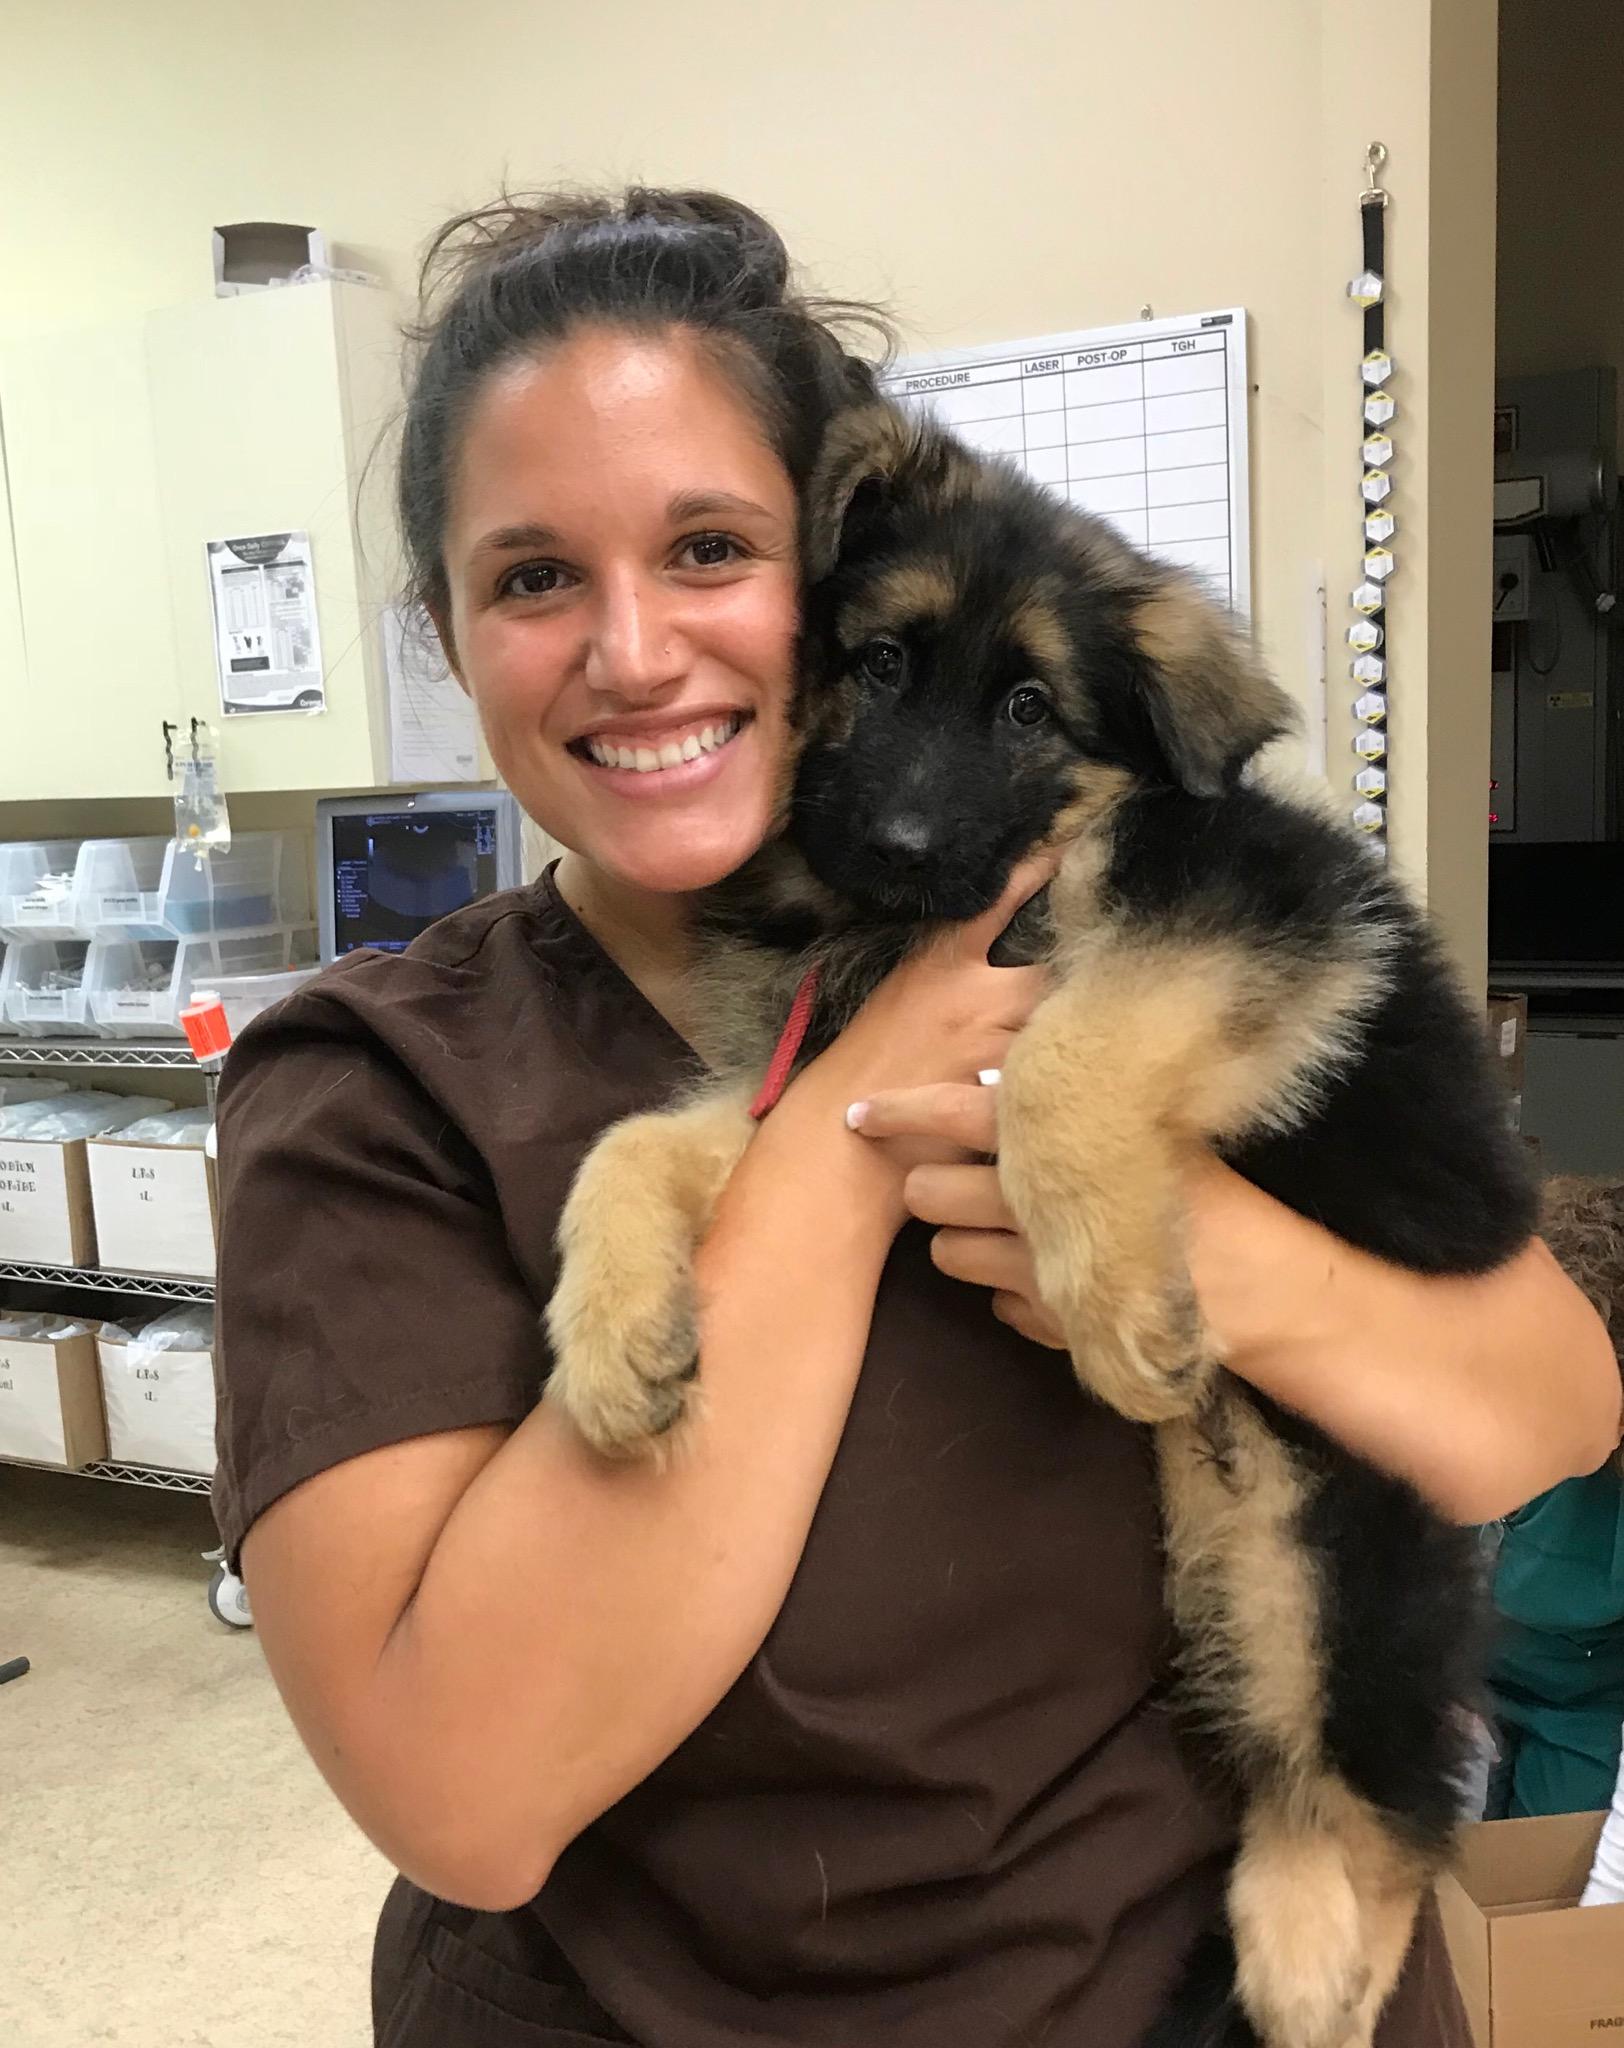 Vet holding a puppy